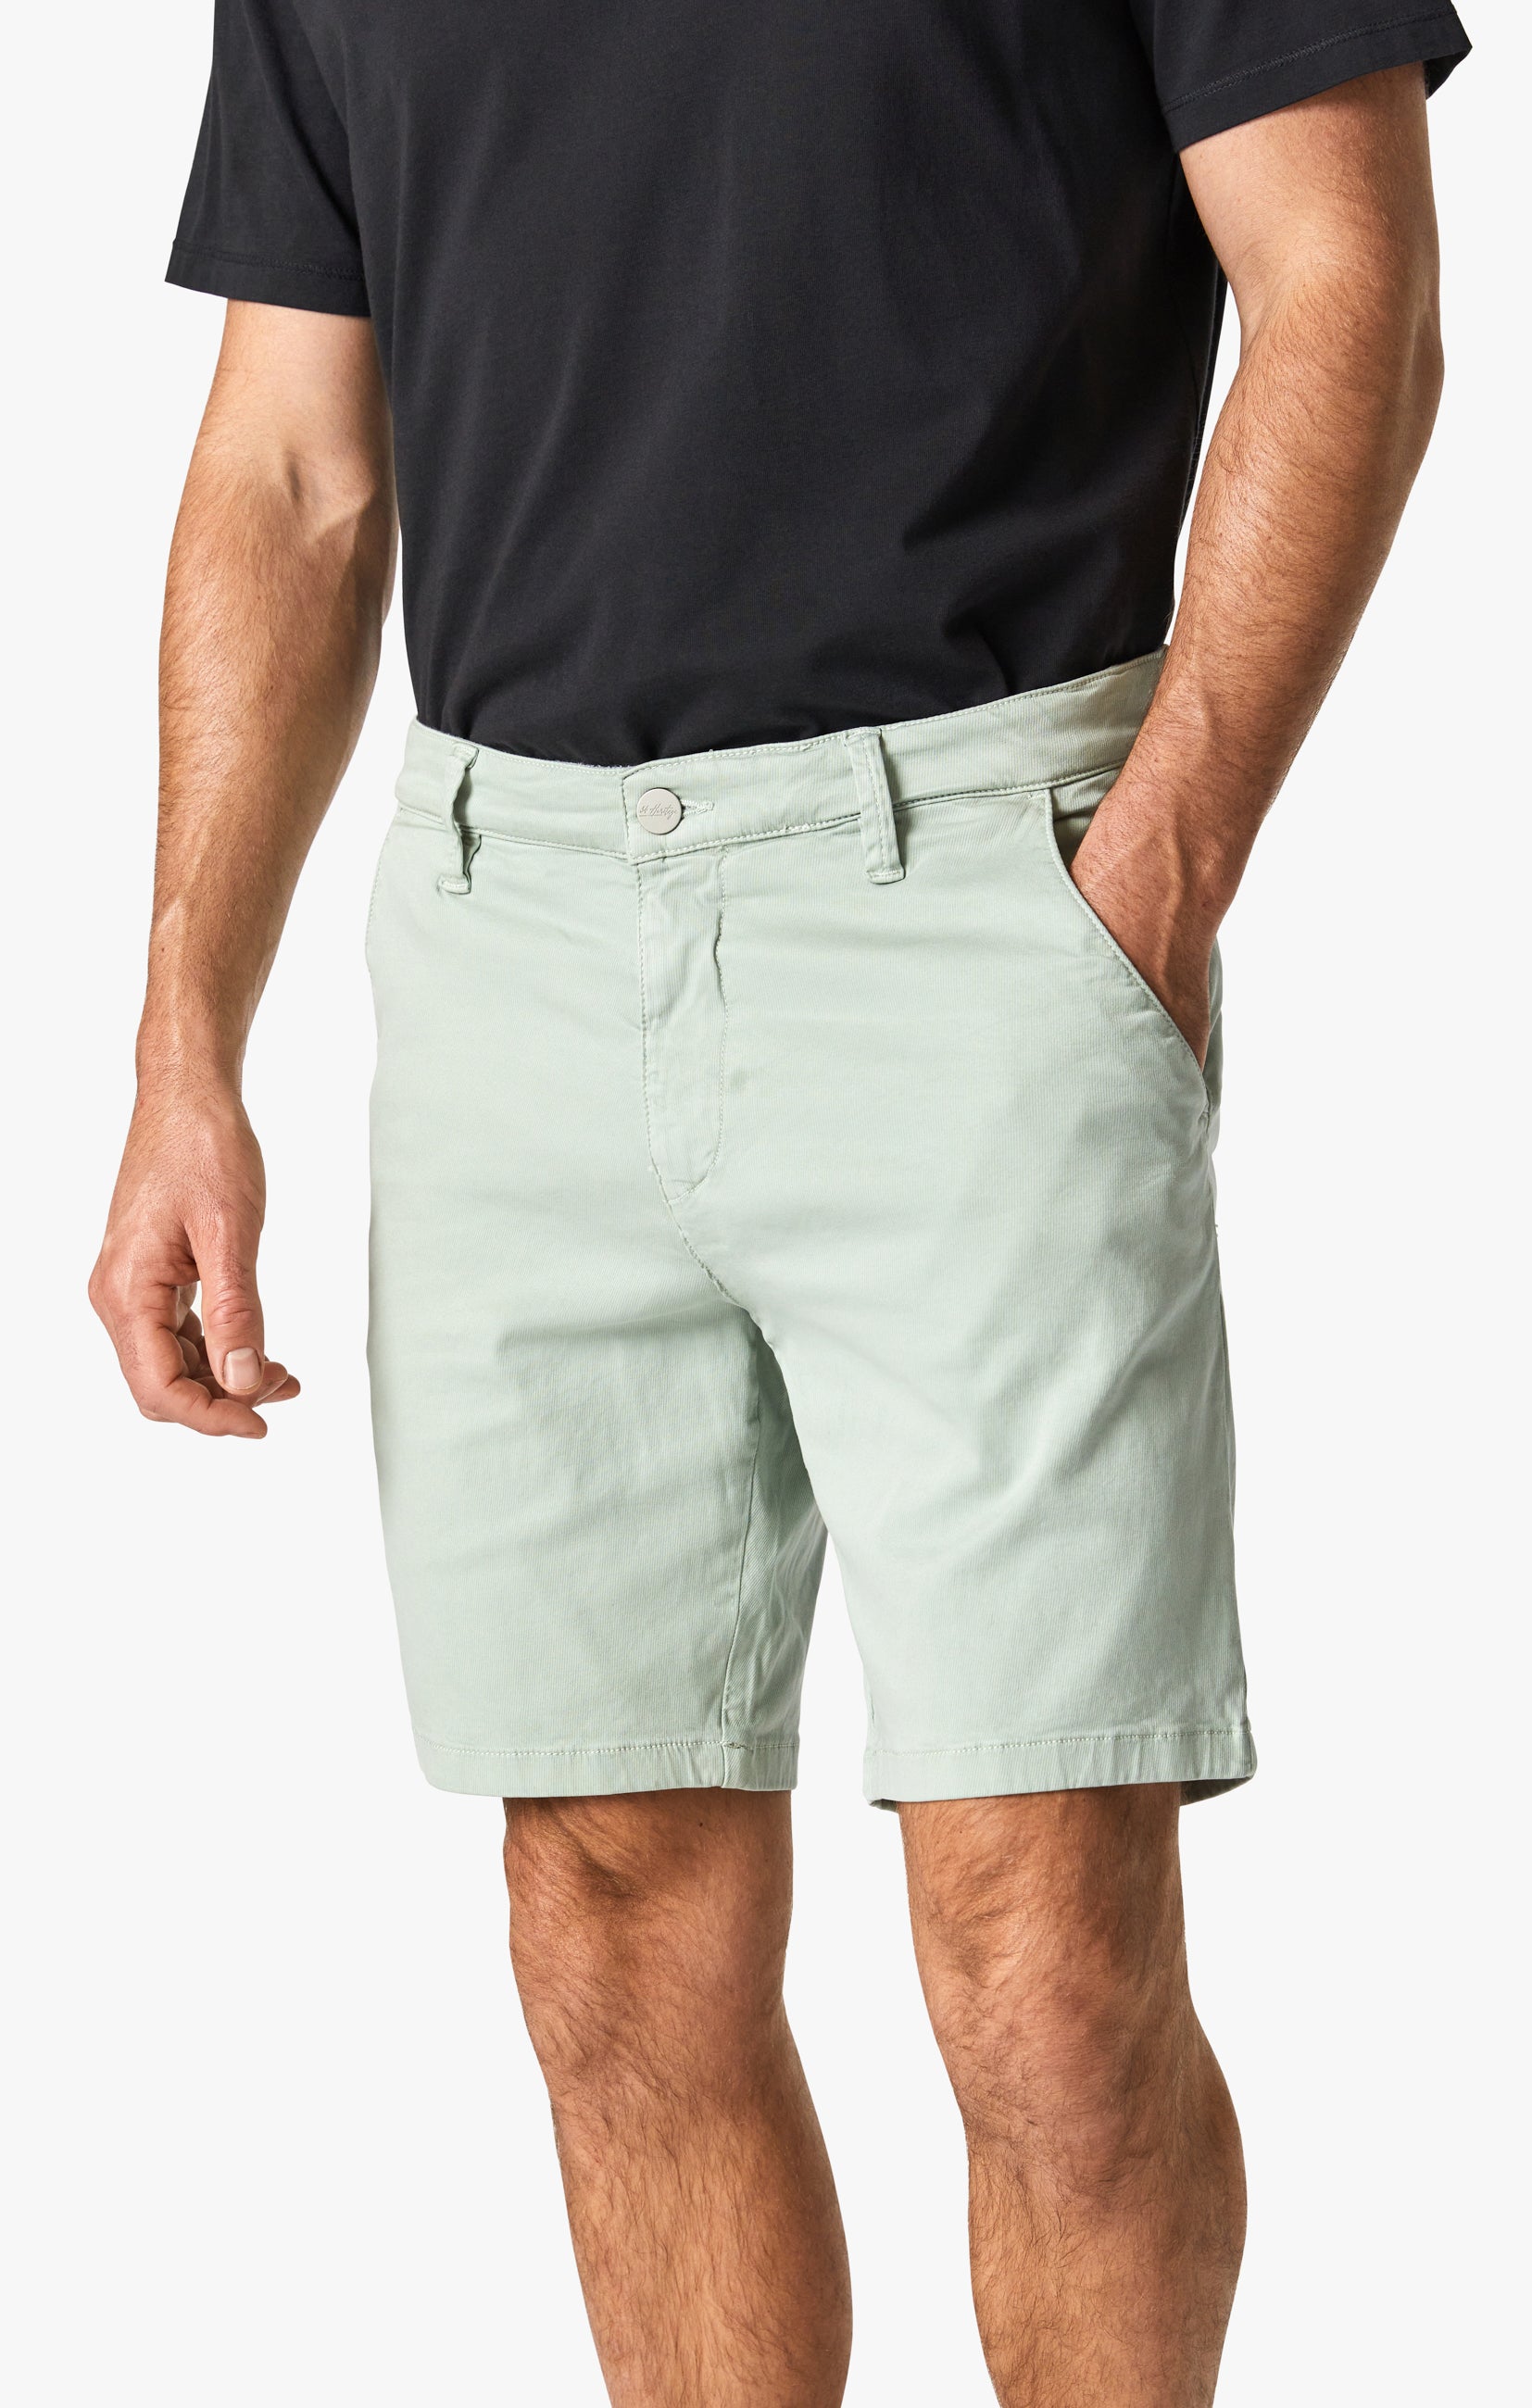 Arizona Shorts In Mint Soft Touch Image 4